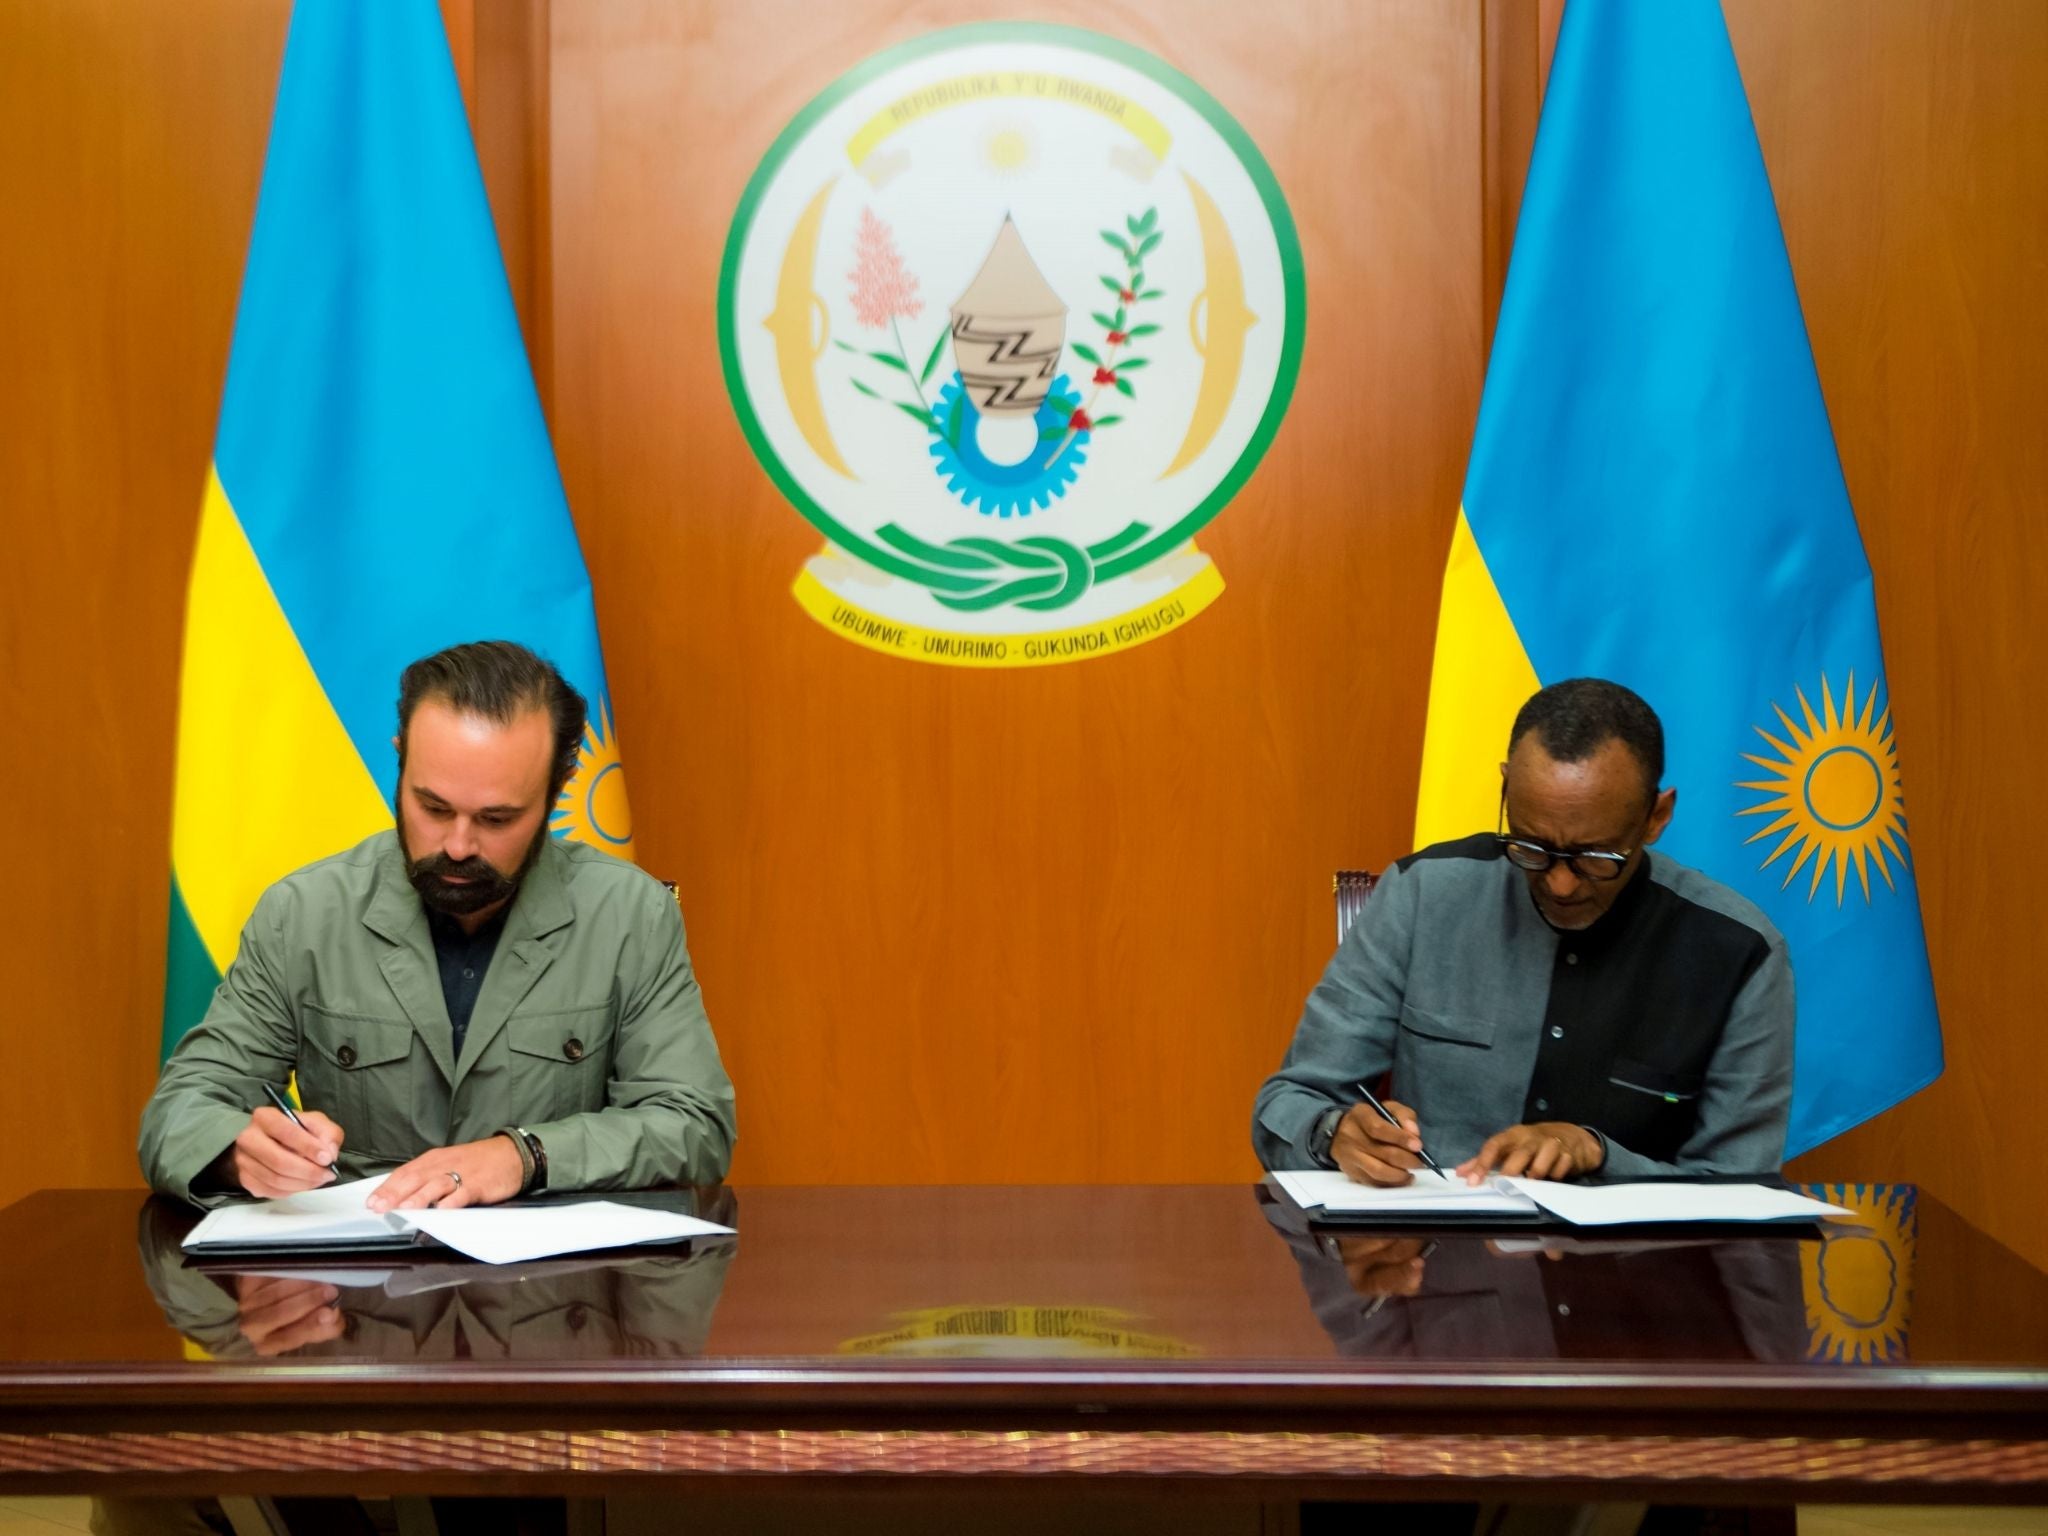 Evgeny Lebedev with Paul Kagame at a signing ceremony to officially welcome Rwanda to Giants Club